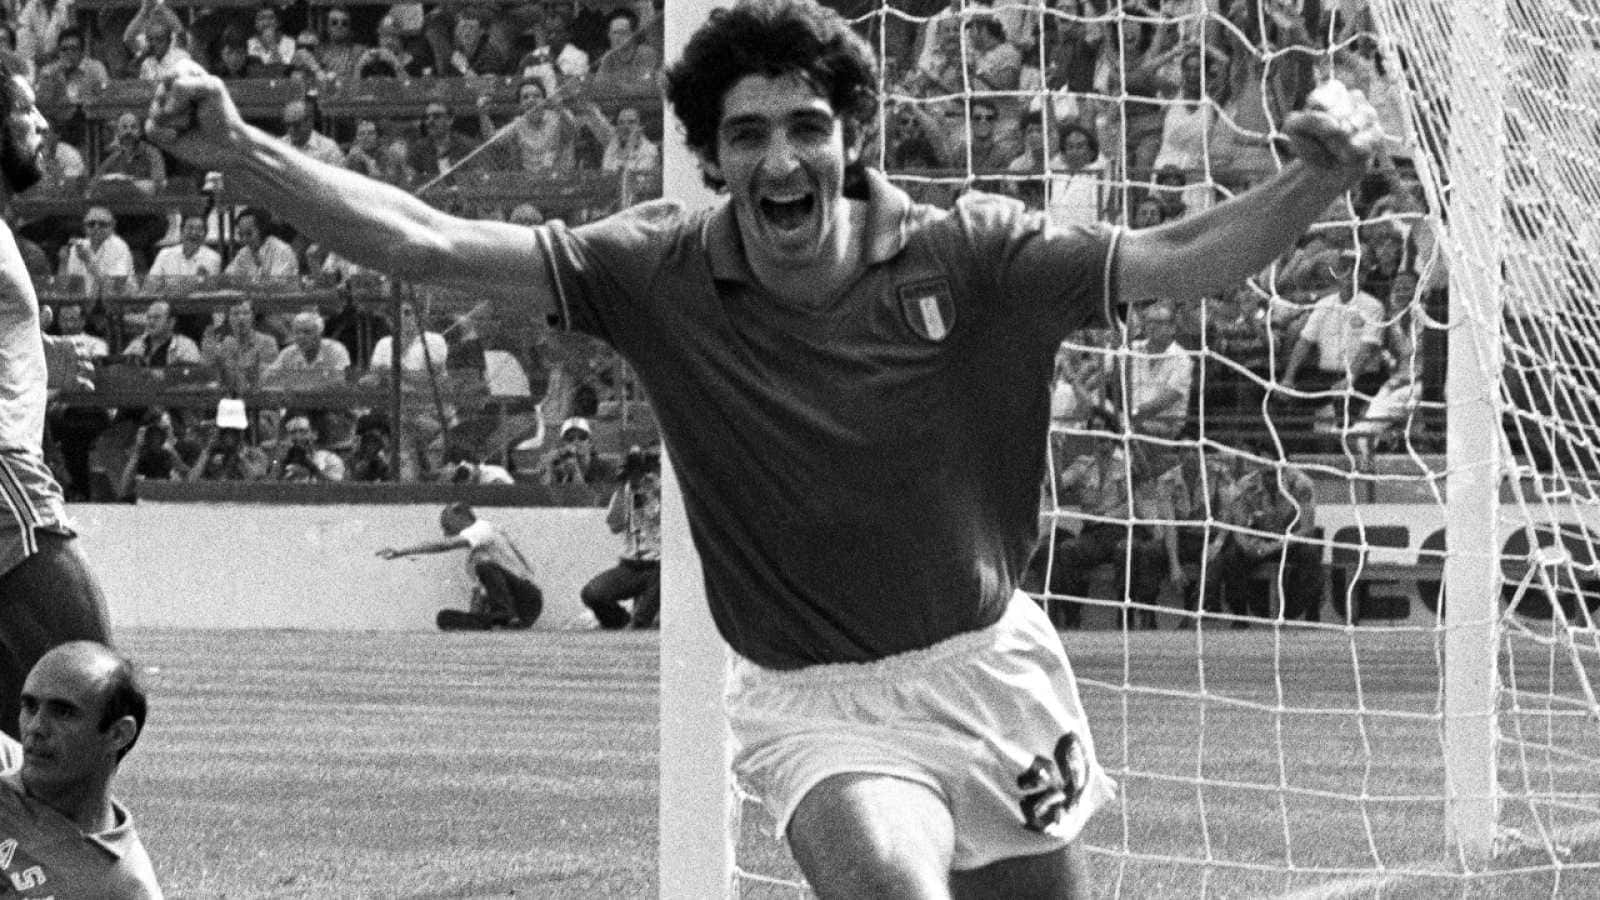 Hjältepaolo Rossi Fotboll (assuming This Is Meant To Be A Possible Wallpaper Design Featuring An Image Of Paolo Rossi Playing Football) Wallpaper